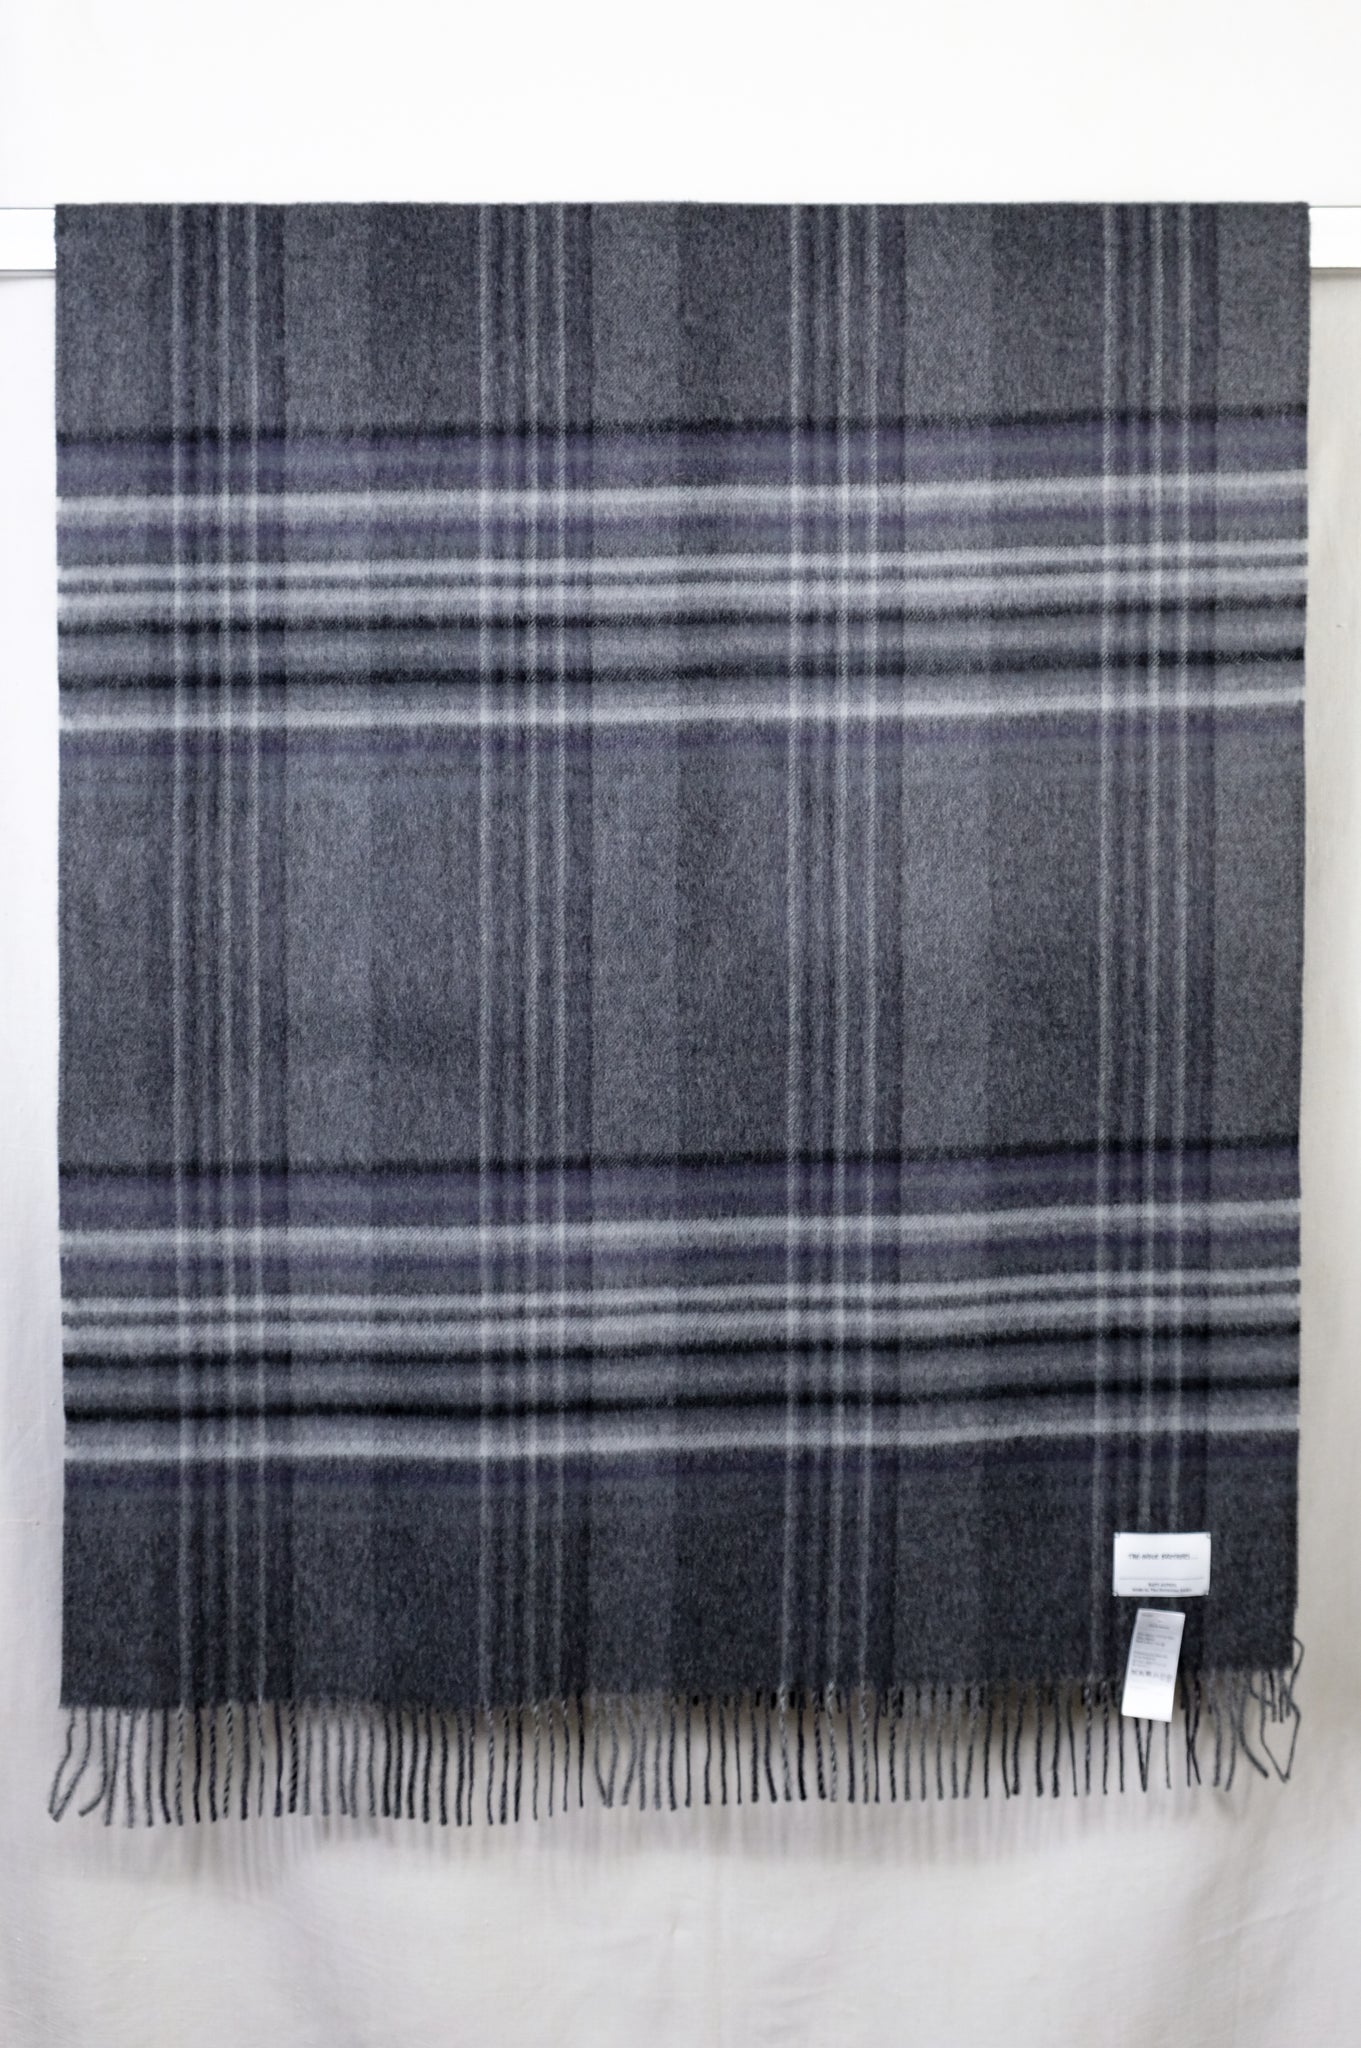 THE INOUE BROTHERS..."Large Brushed Stole (pattern) / Checkered Black"